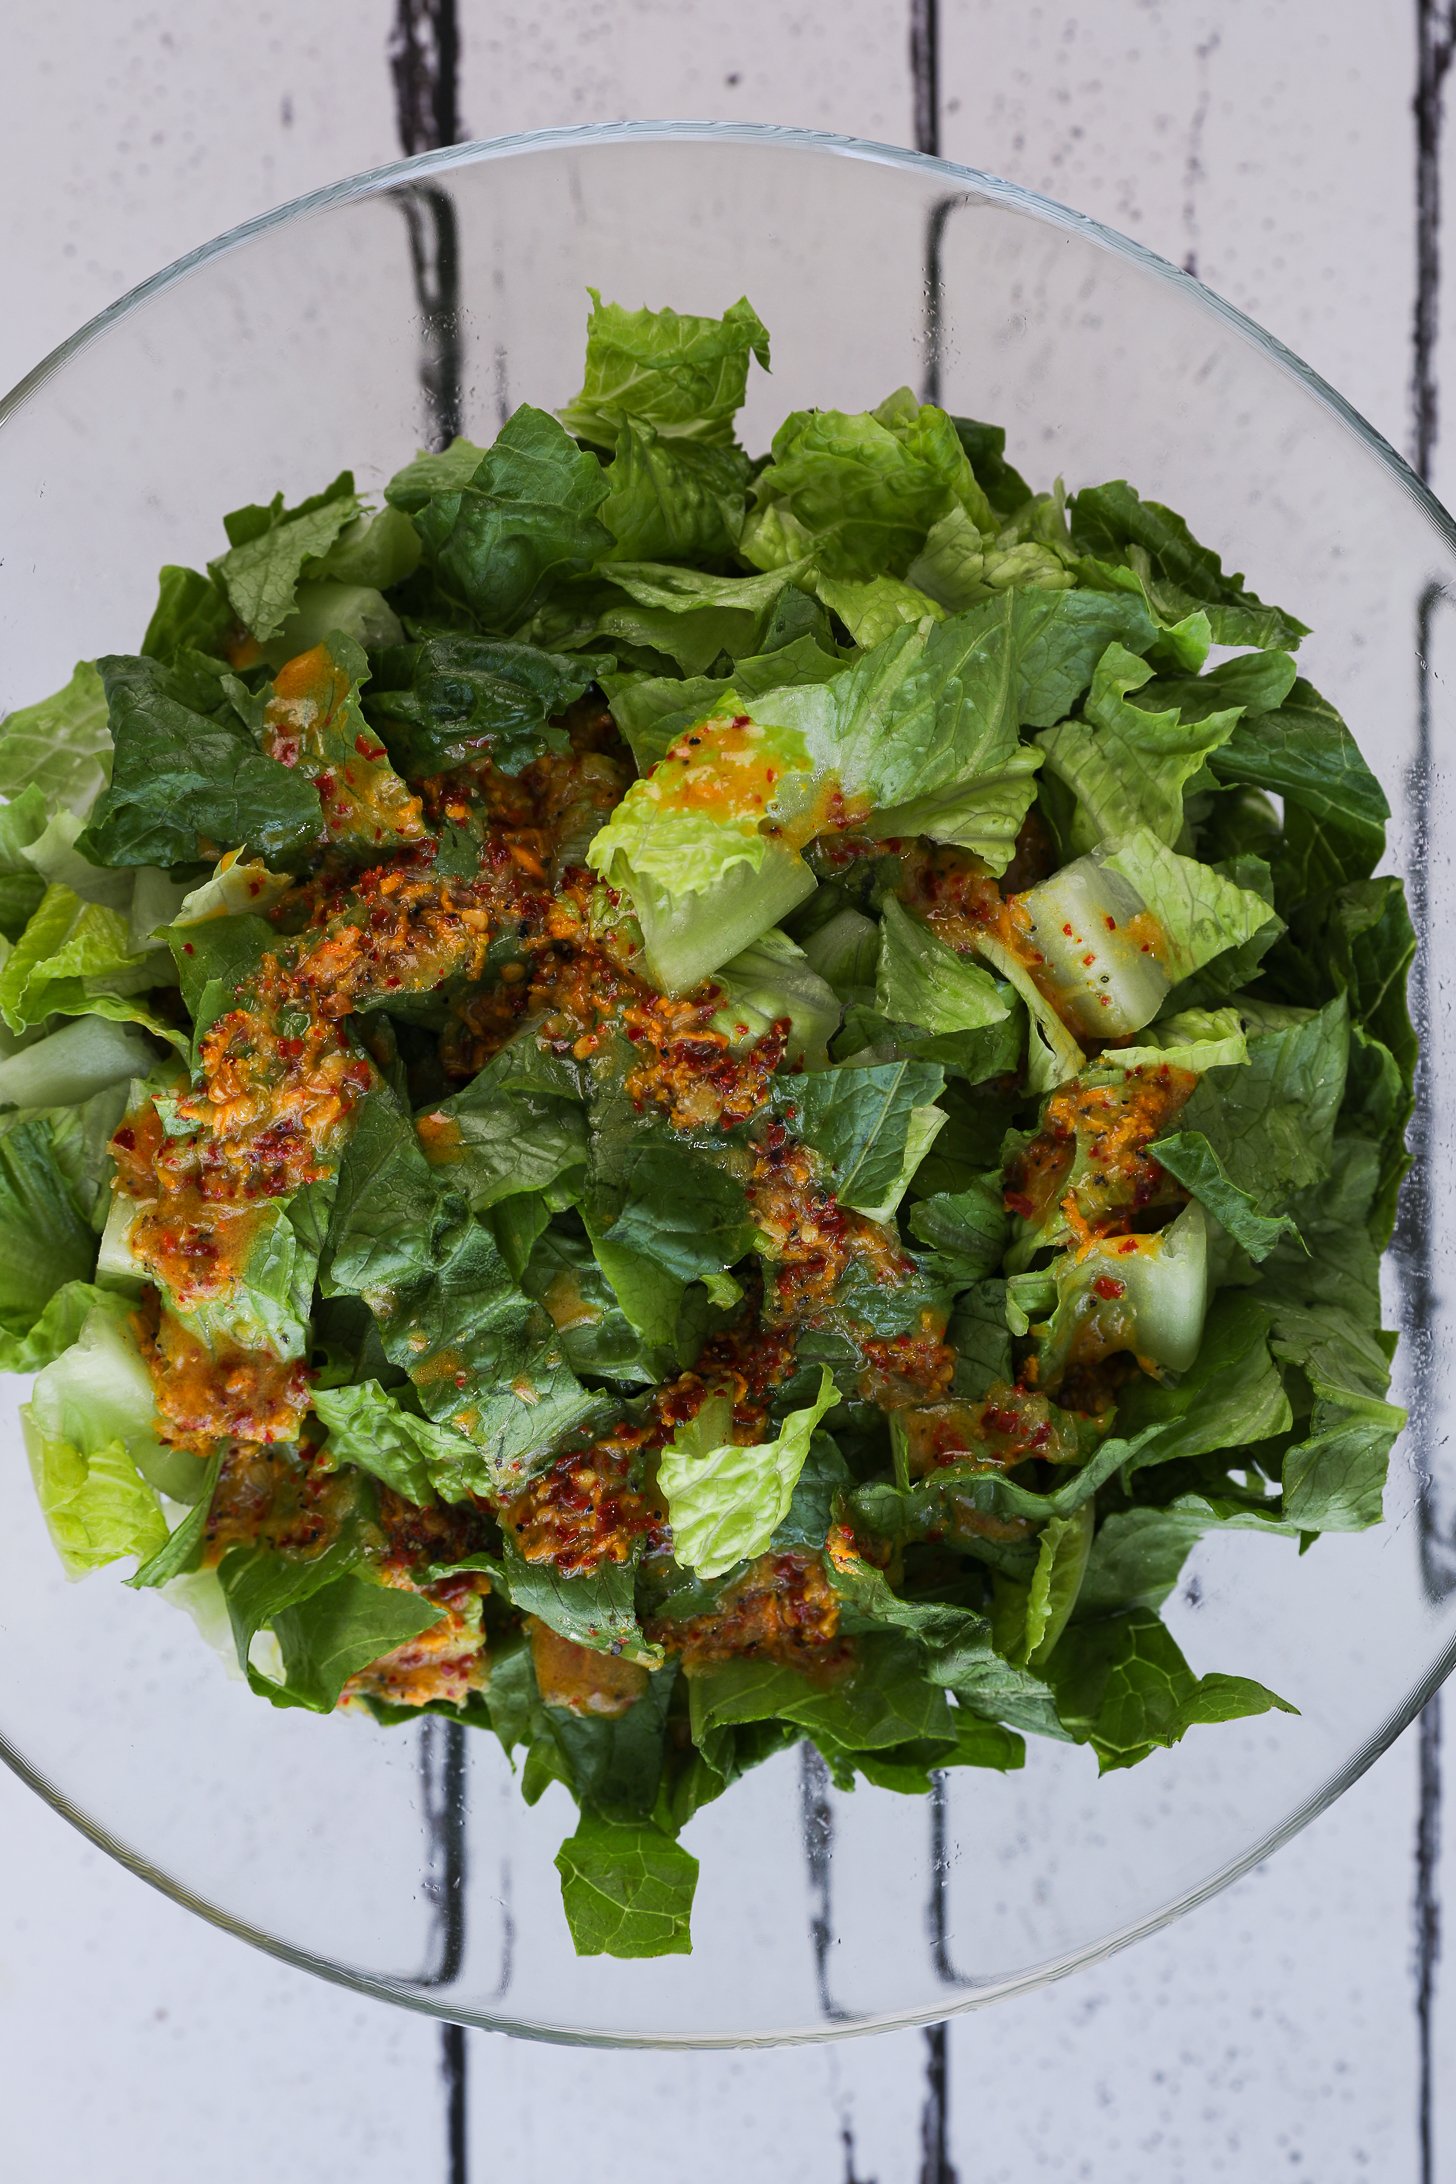 Top-view image of a bowl of chopped lettuce topped with a fresh turmeric salad dressing.